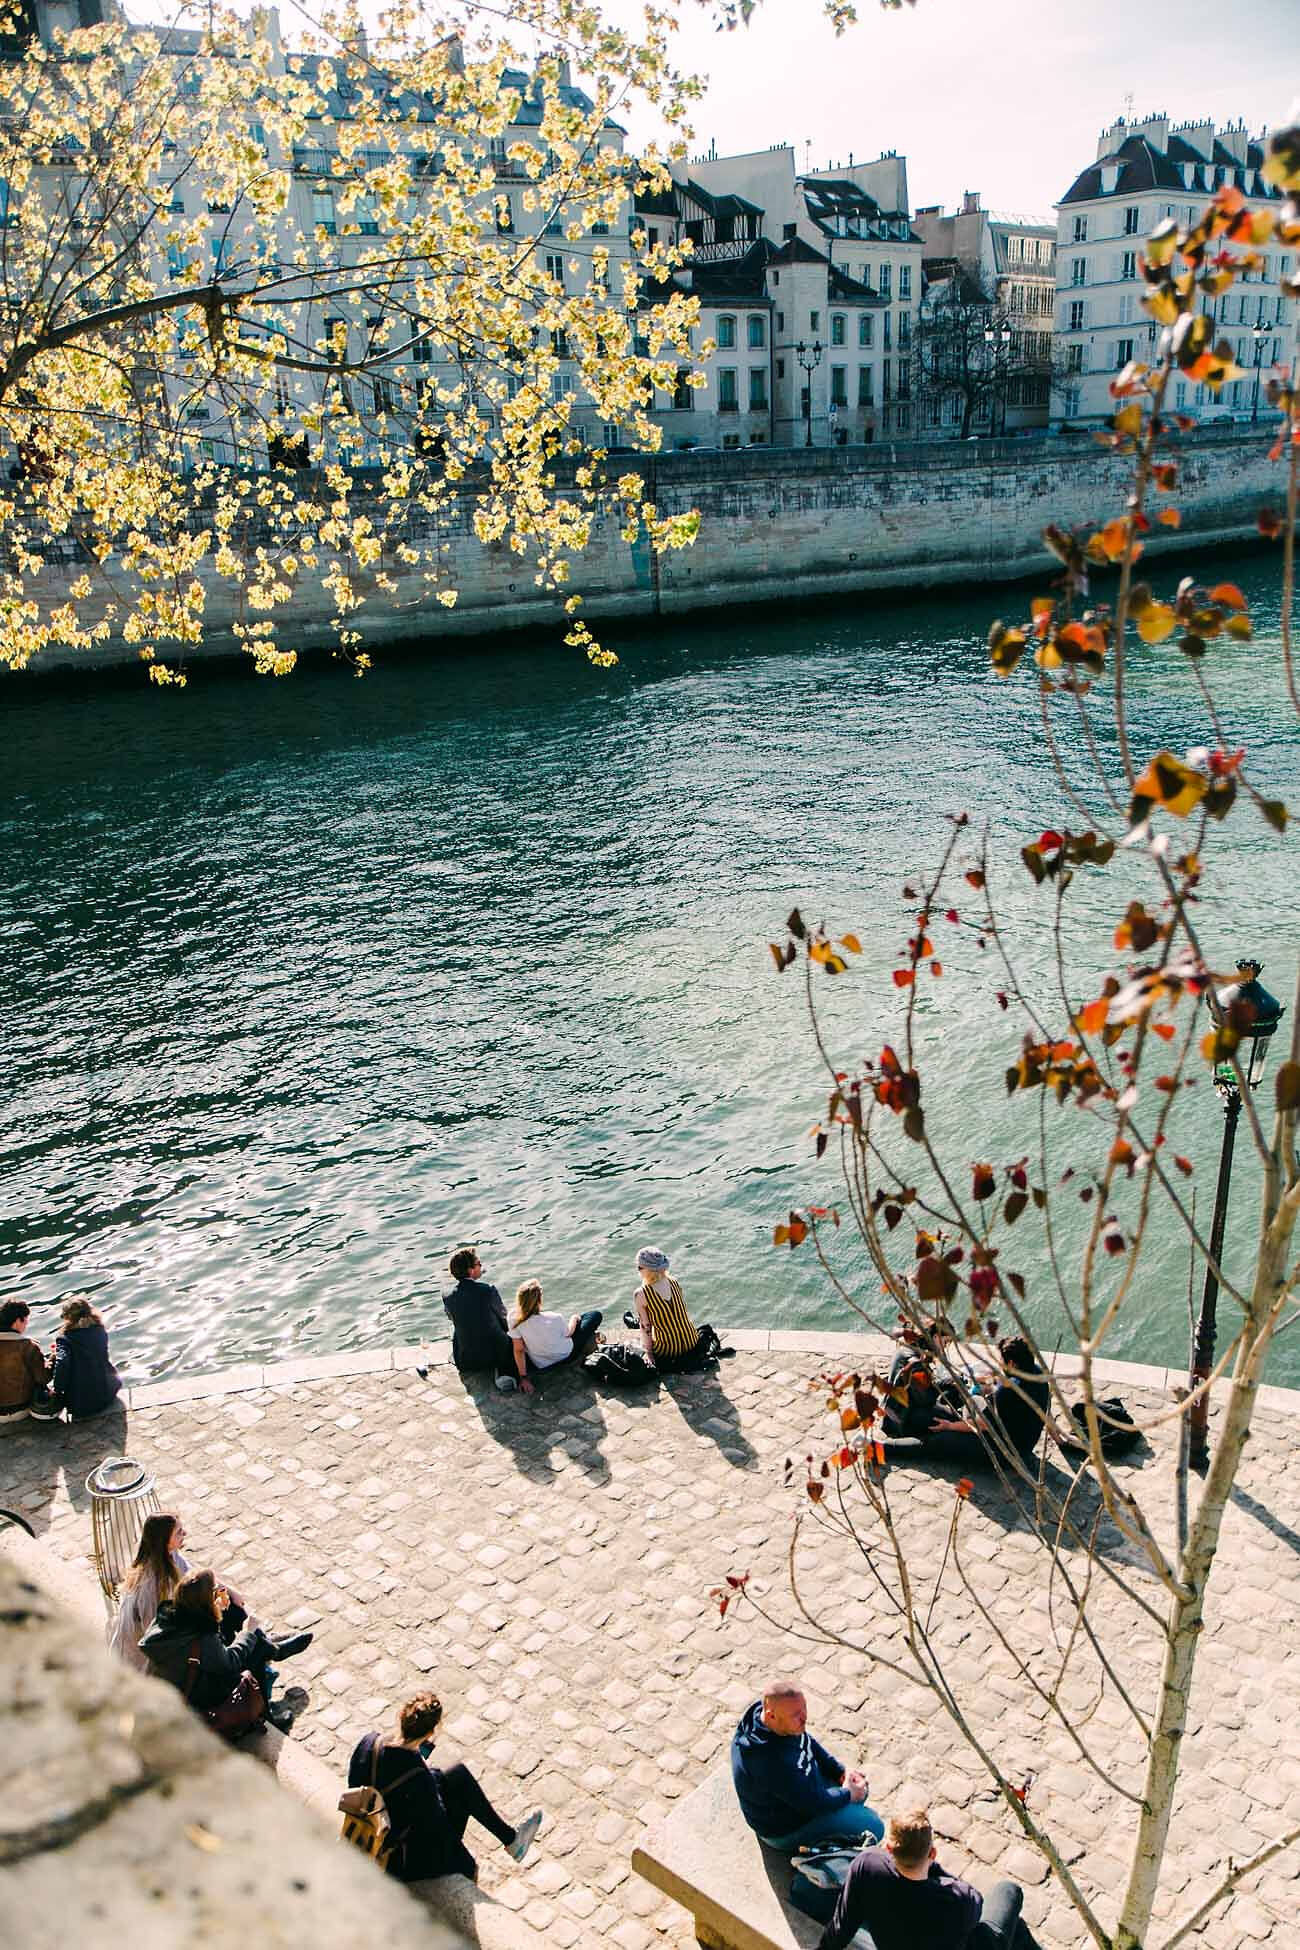 Chelsea Loren travel photographer capturing couples, people, scattered on the banks of the Seine having picnic in spring.